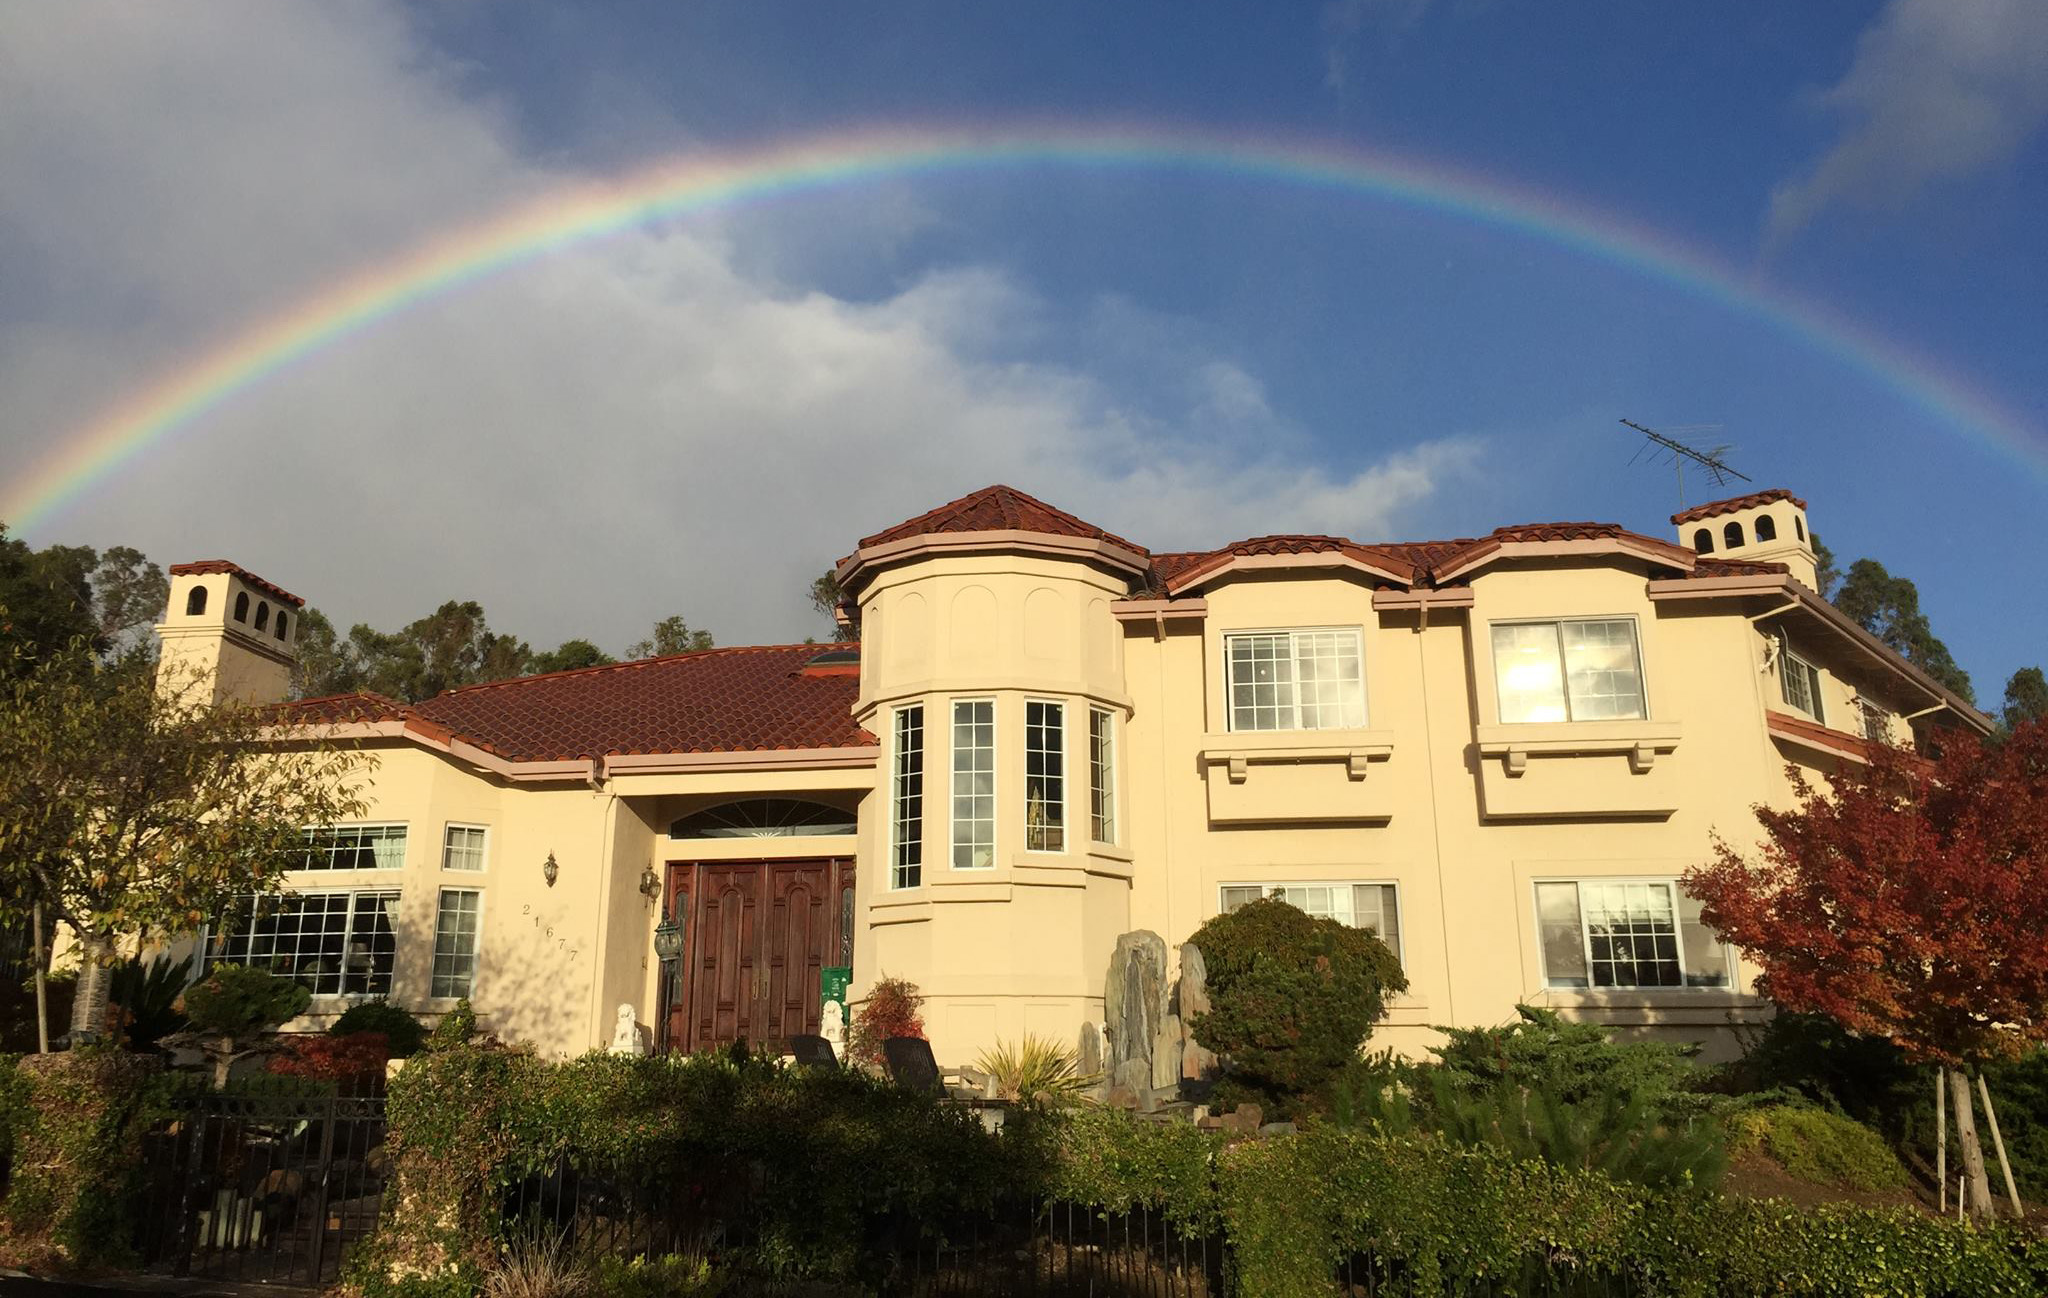 The Rainbow Mansion | An intentional community of people working to ...